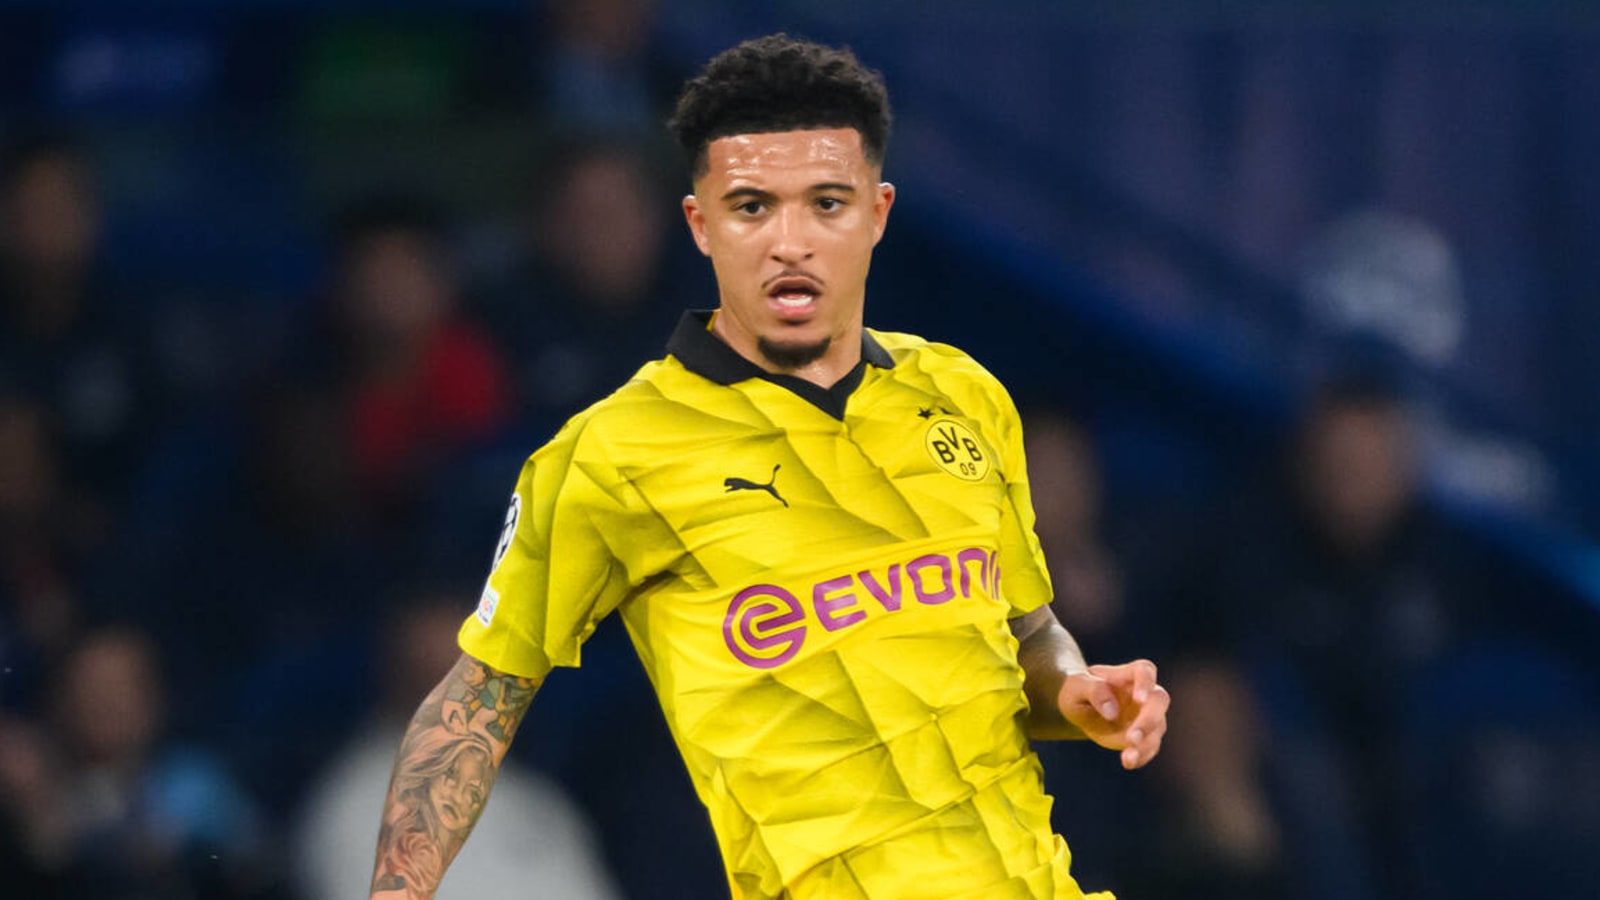 Watch: Jadon Sancho leads BVB dressing room celebrations with Adele classic